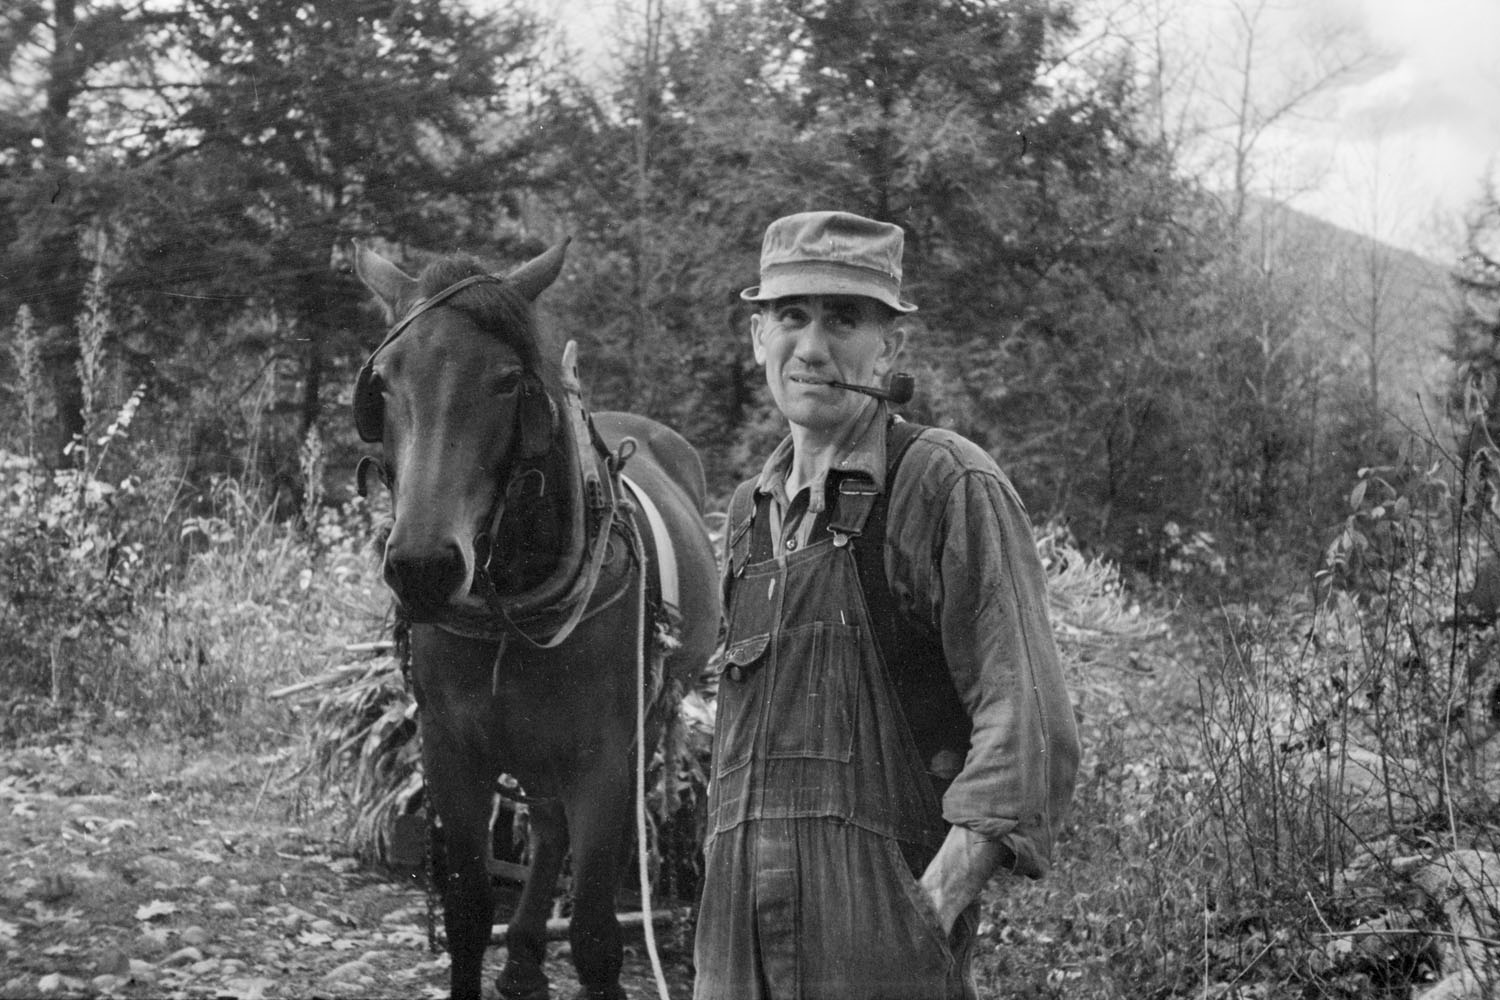 A man from Nicholson Hollow with one of the few horses, Shenandoah National Park, October 1935